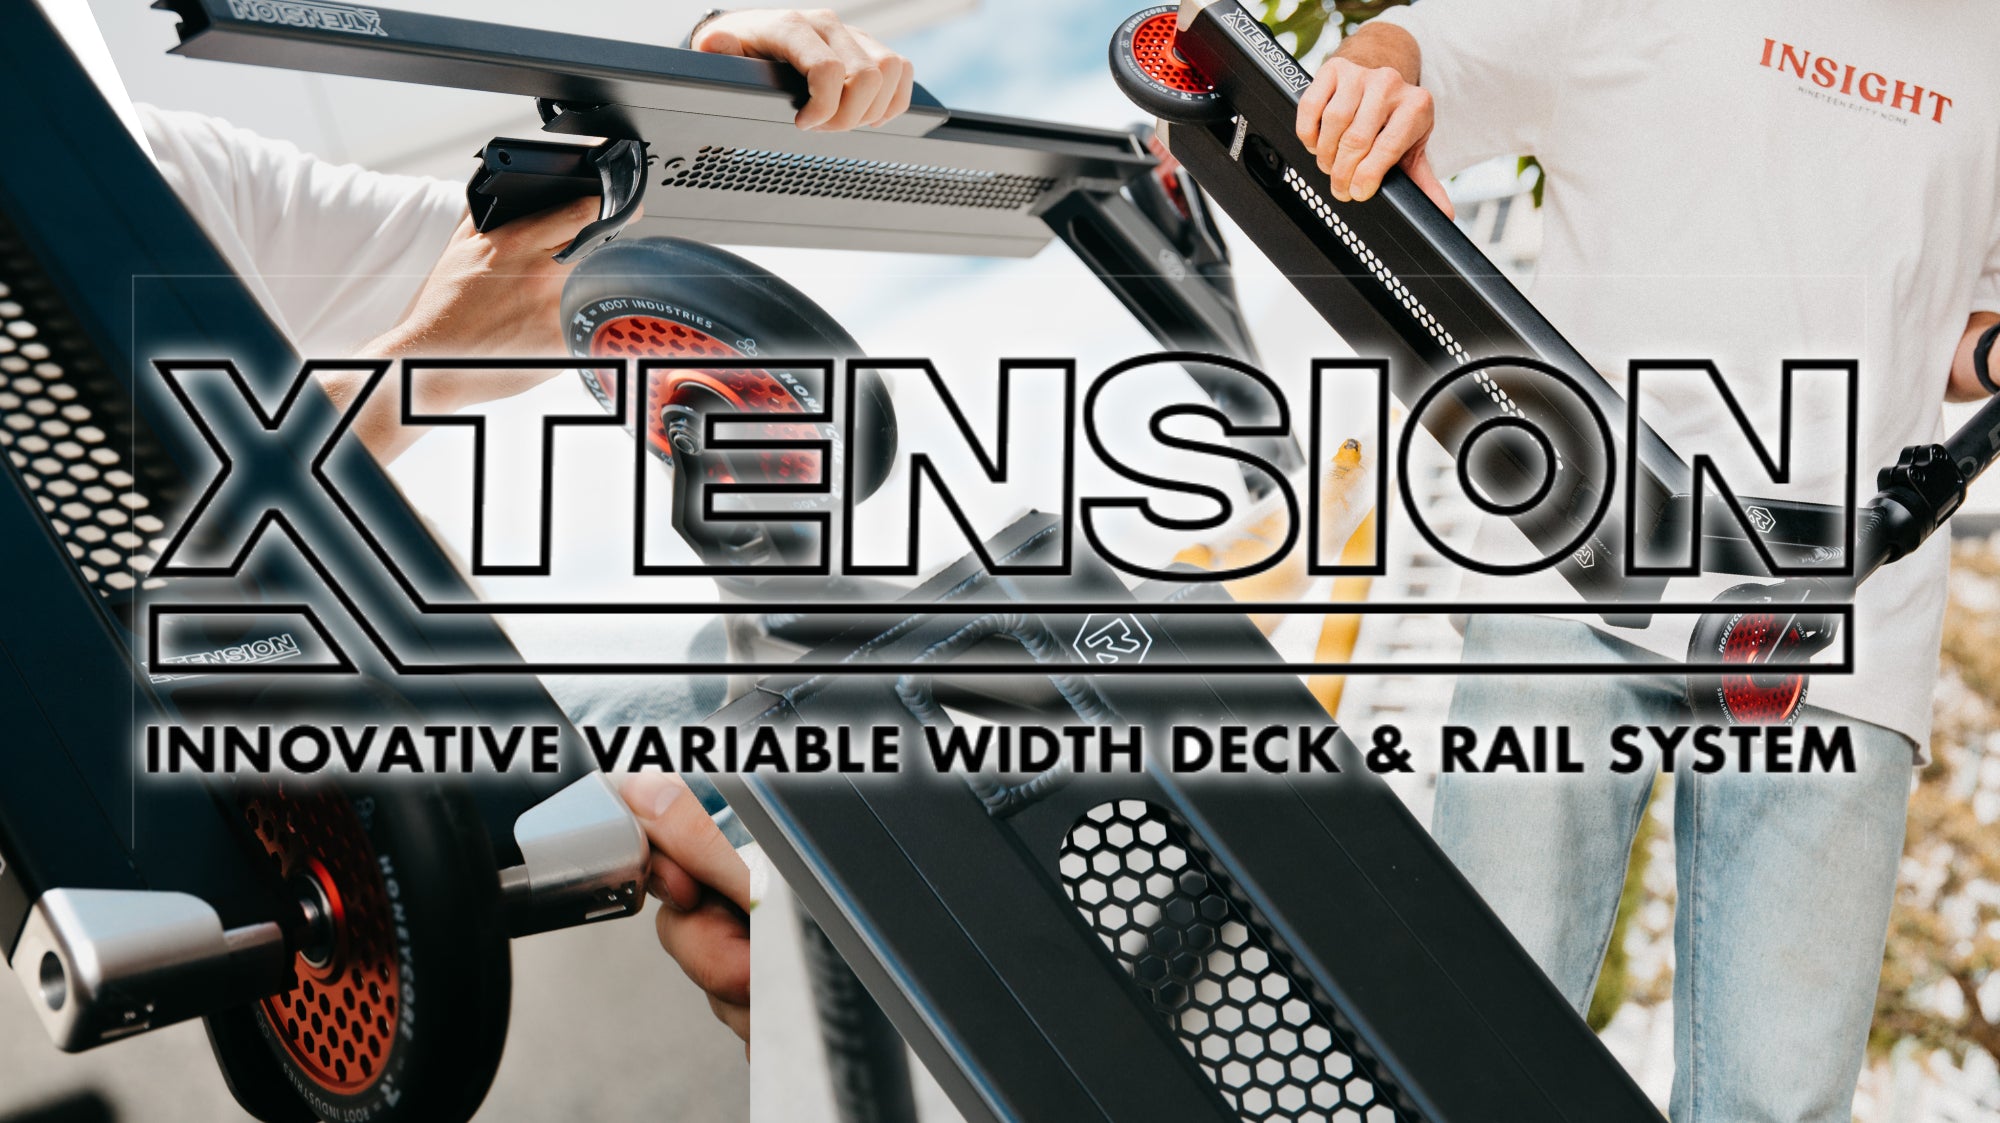 Read all about the Root Industries Xtension Deck in this blog post. Innovative variable width deck and rail system. 